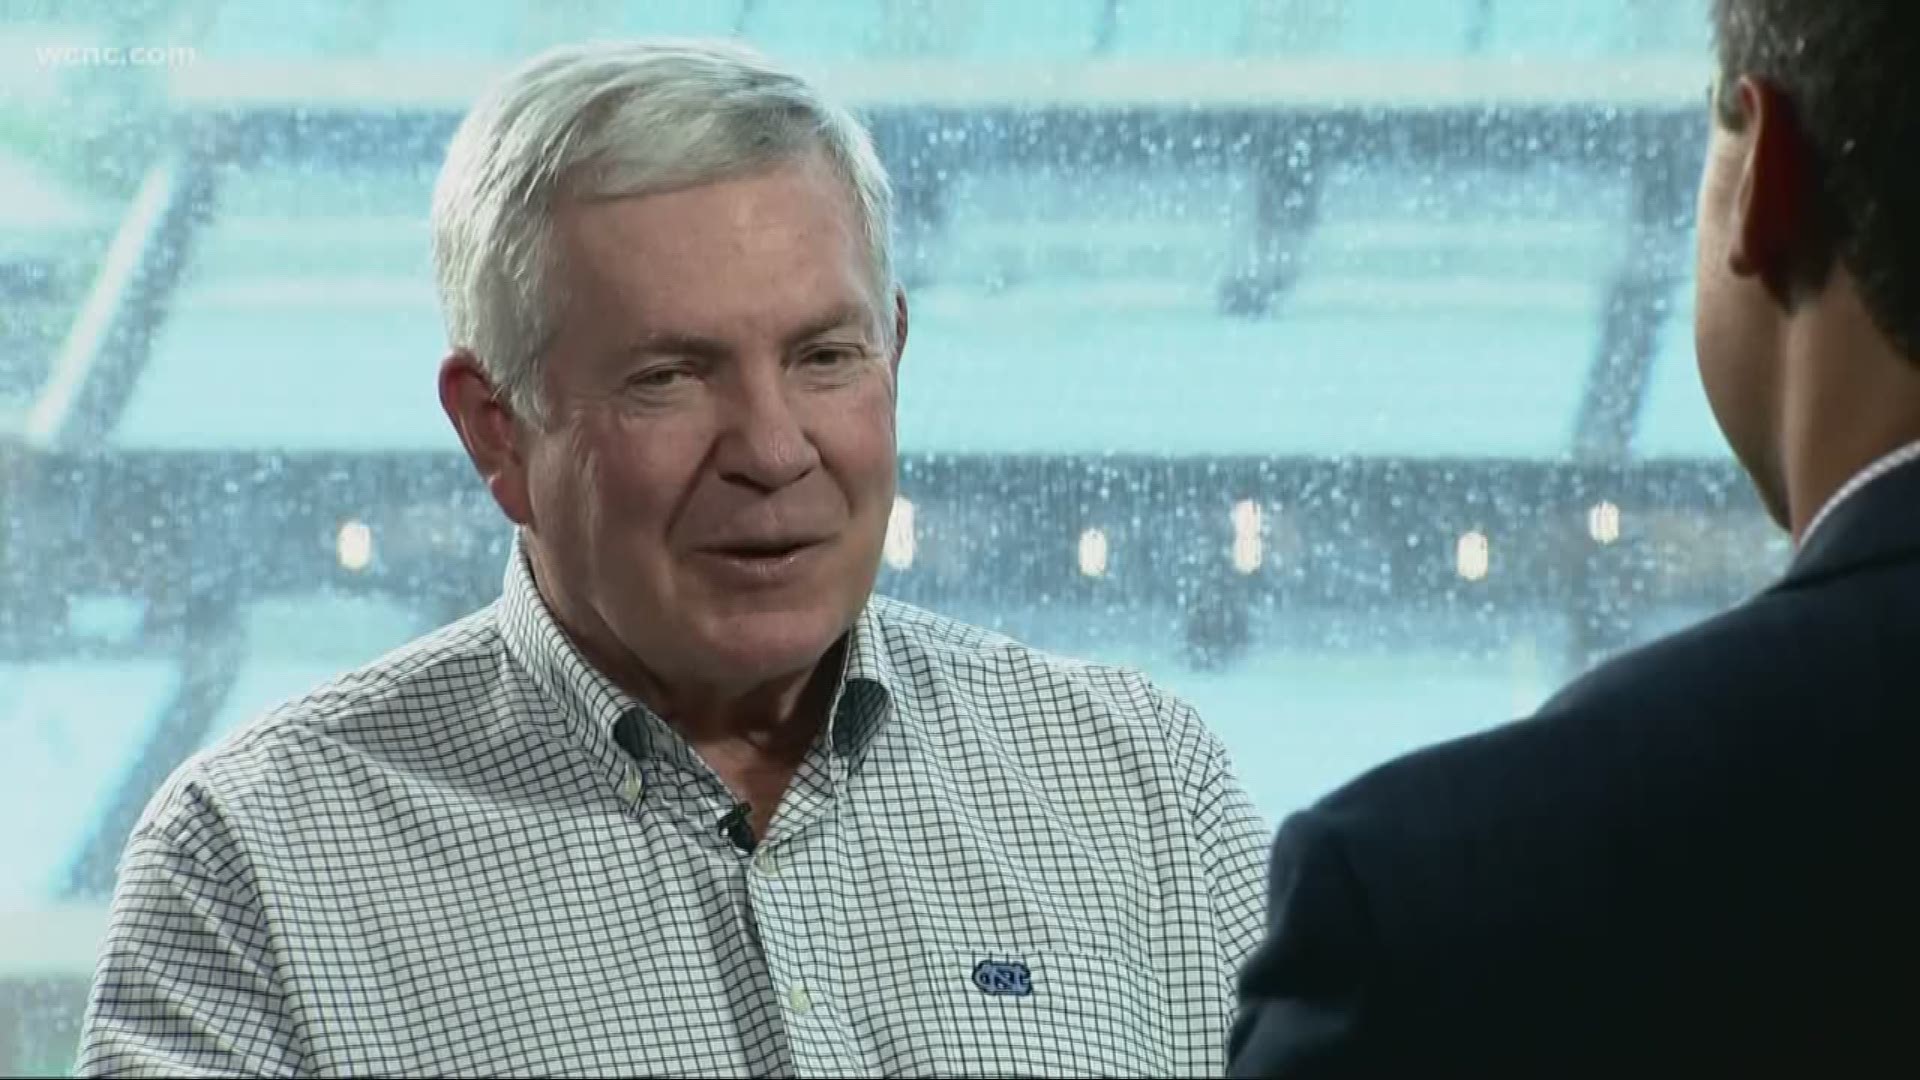 WCNC's Sports Director Nick Carboni sat down for an exclusive interview with Mack Brown ahead of the new season.